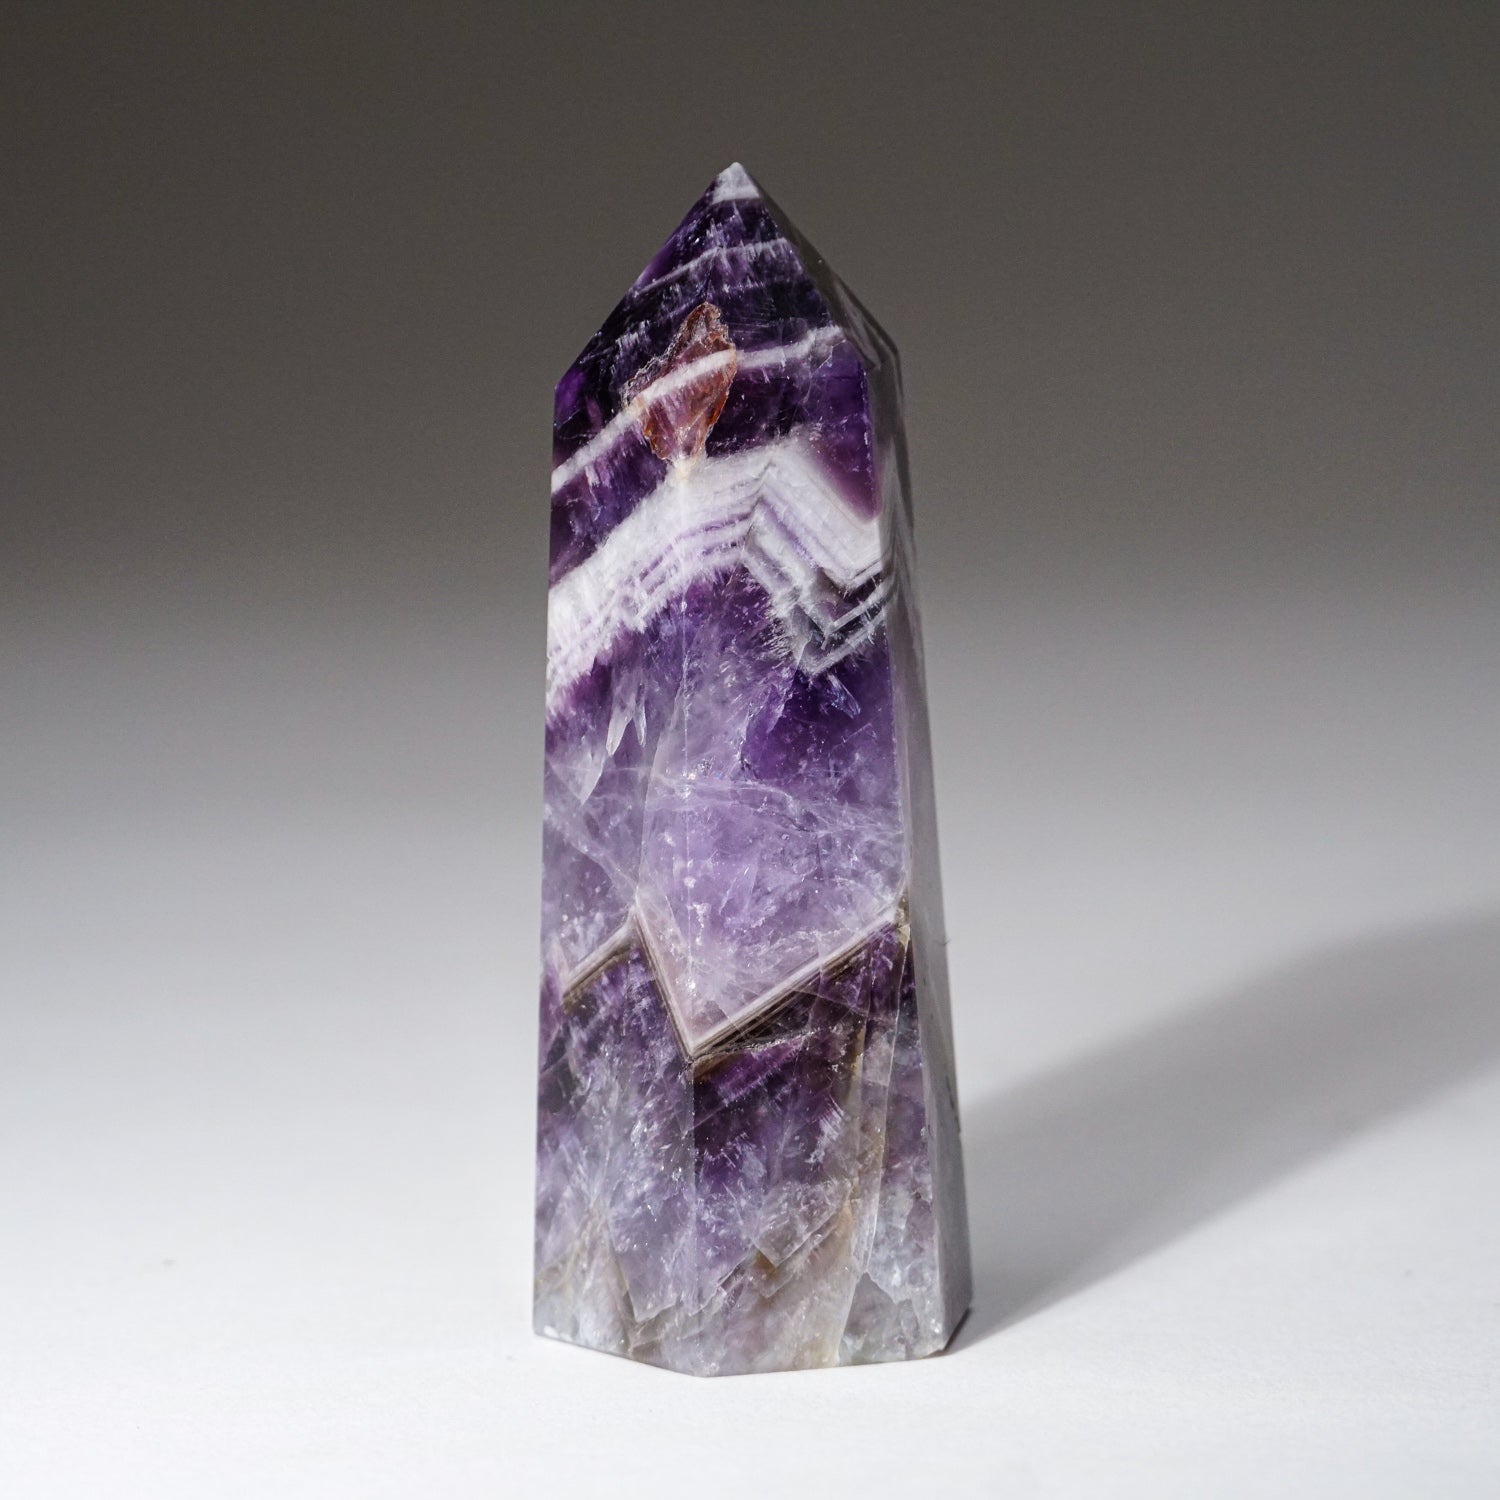 Polished Chevron Amethyst Point from Brazil (146.2 grams)